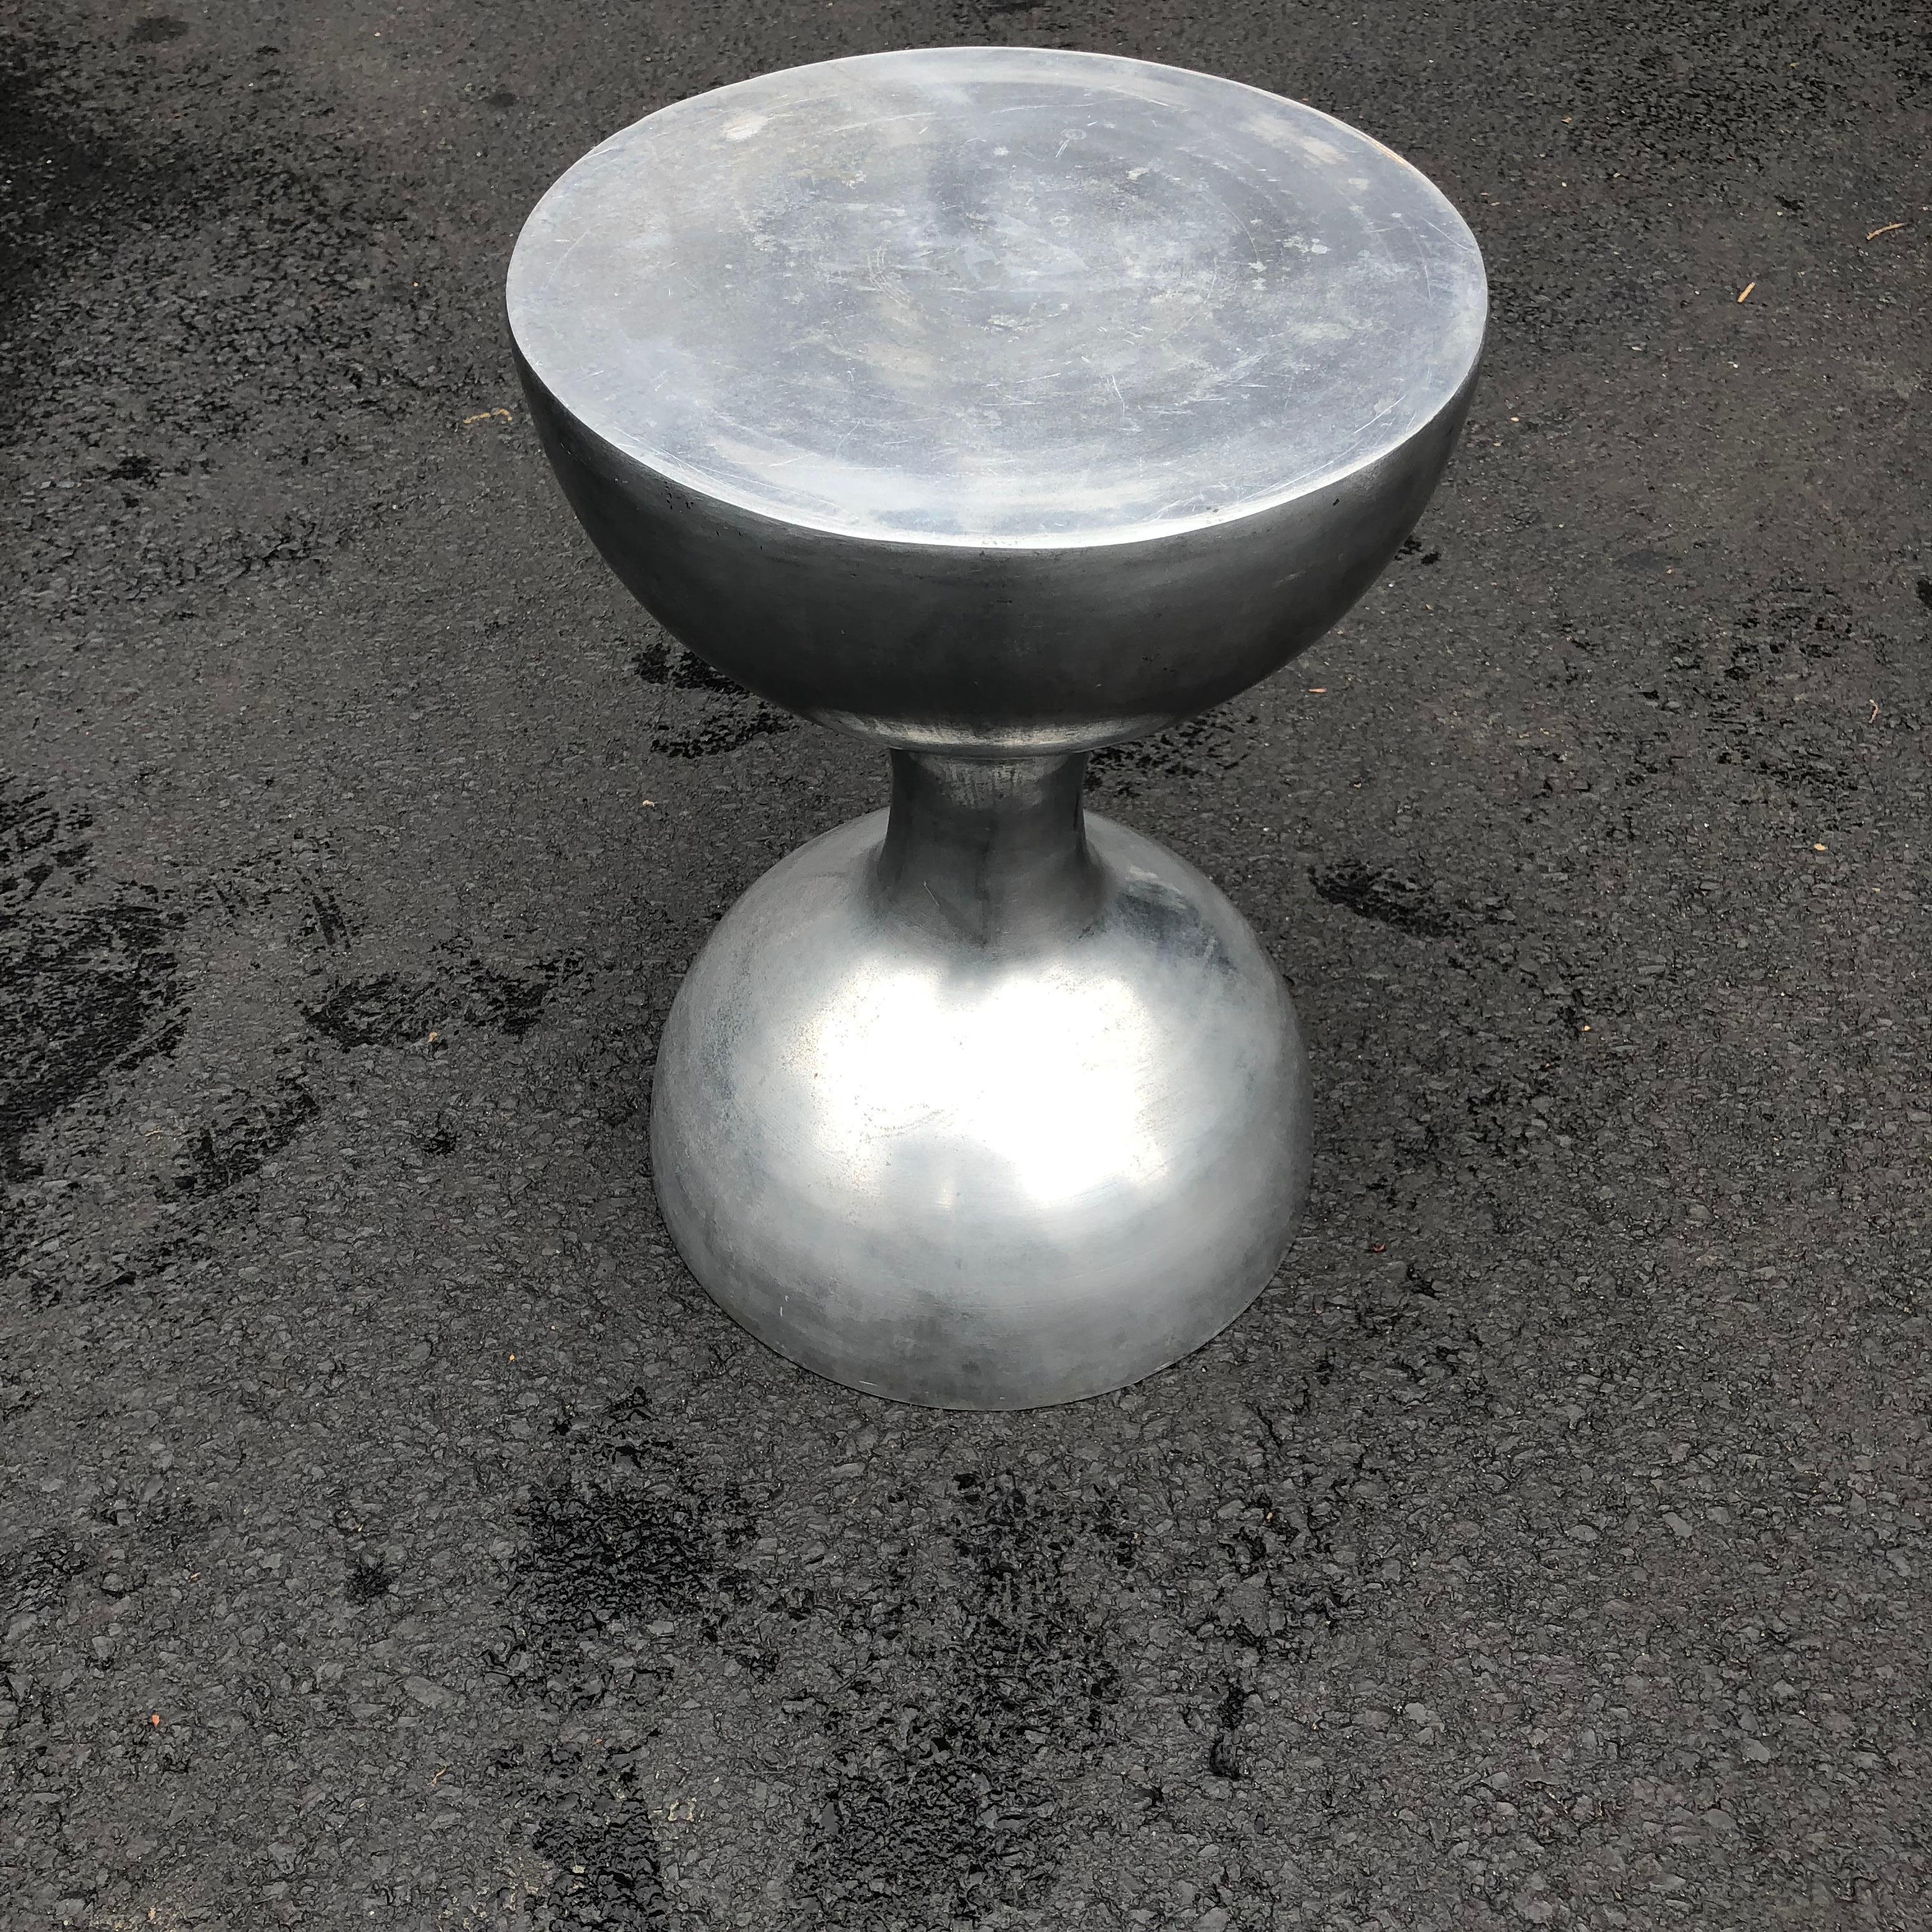 Mid-Century Modern hourglass pedestal in thick aluminum plate.

3/16 inch thick aluminum plate with a rough industrial finish.